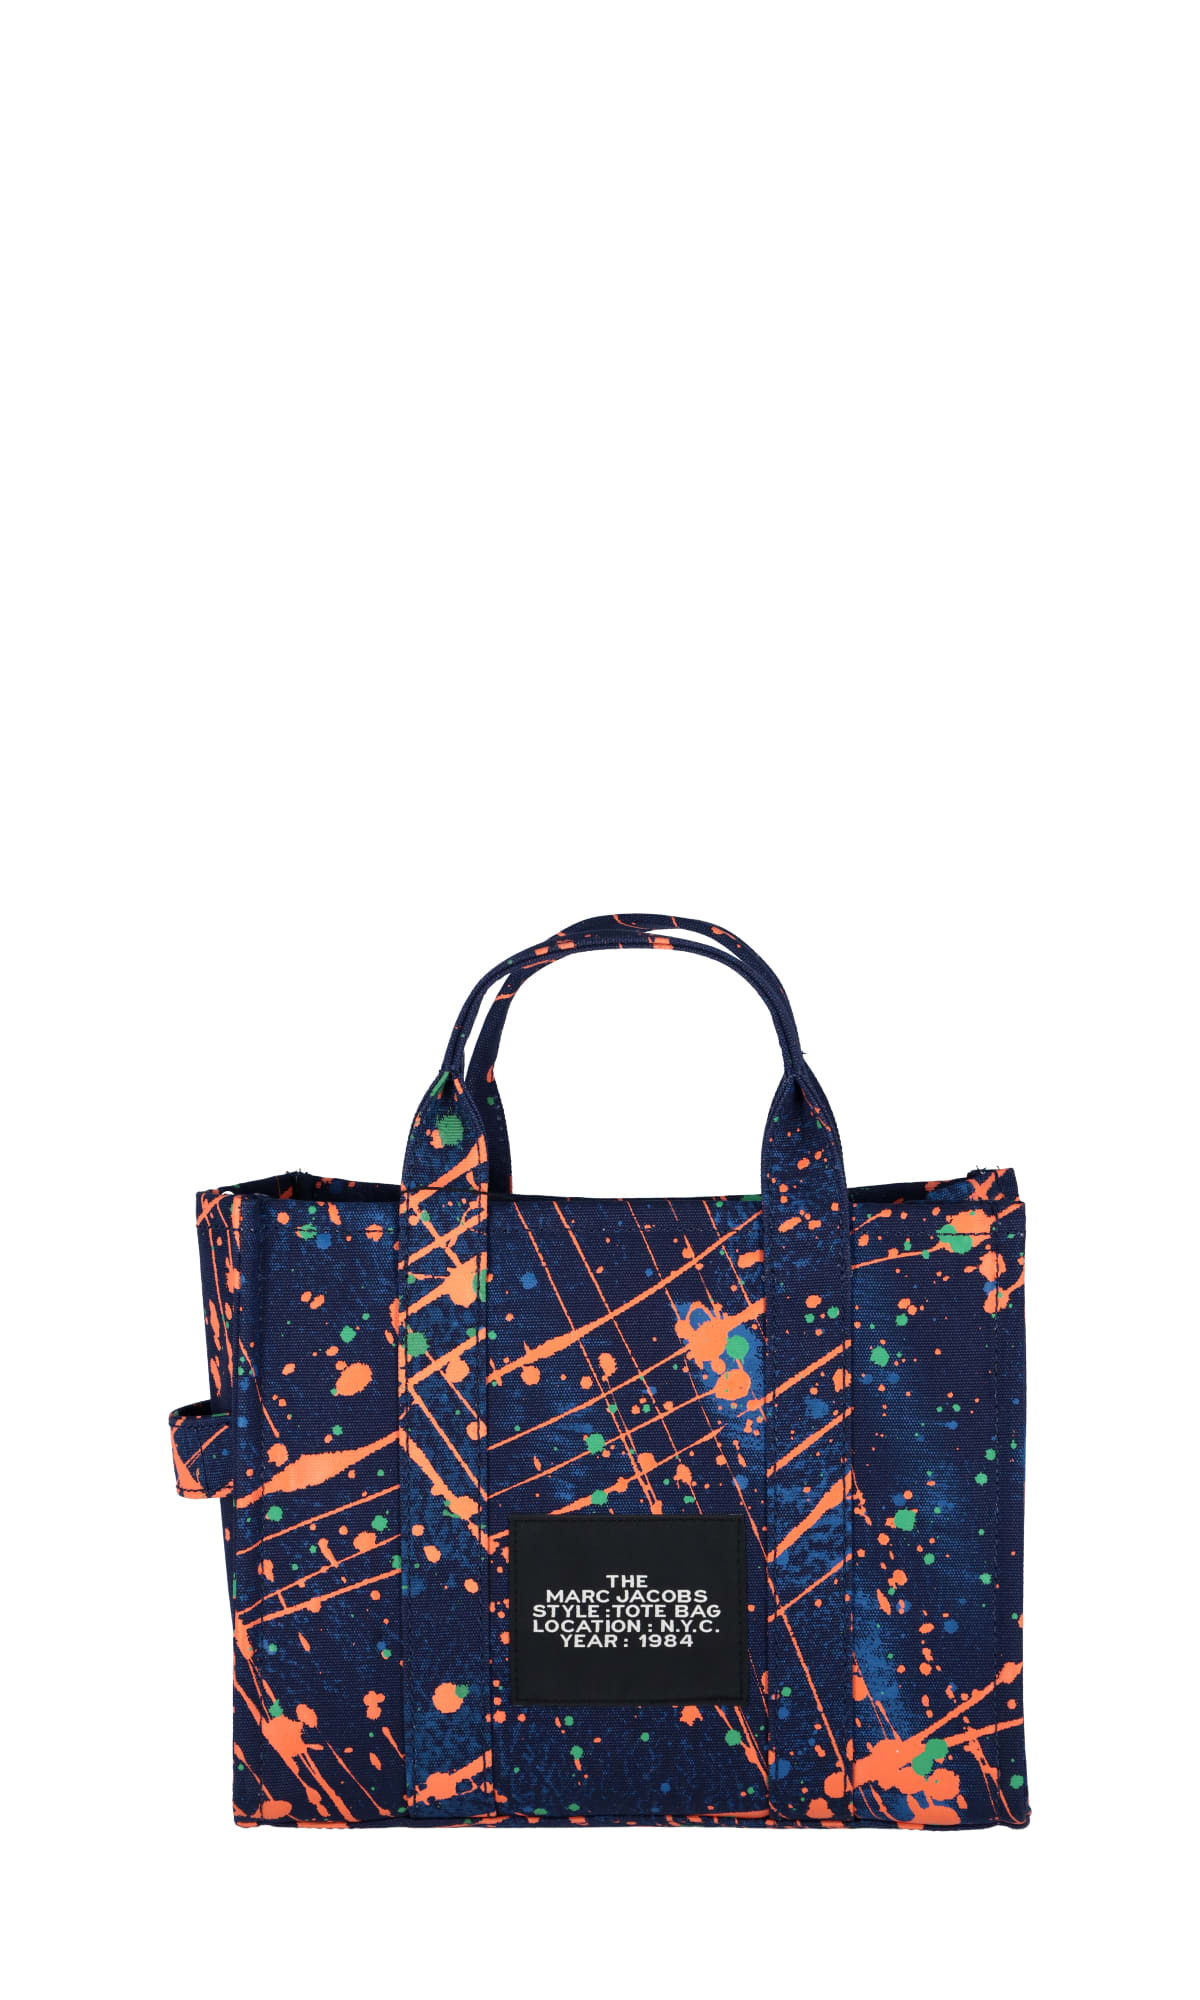 Marc Jacobs Tote in blue